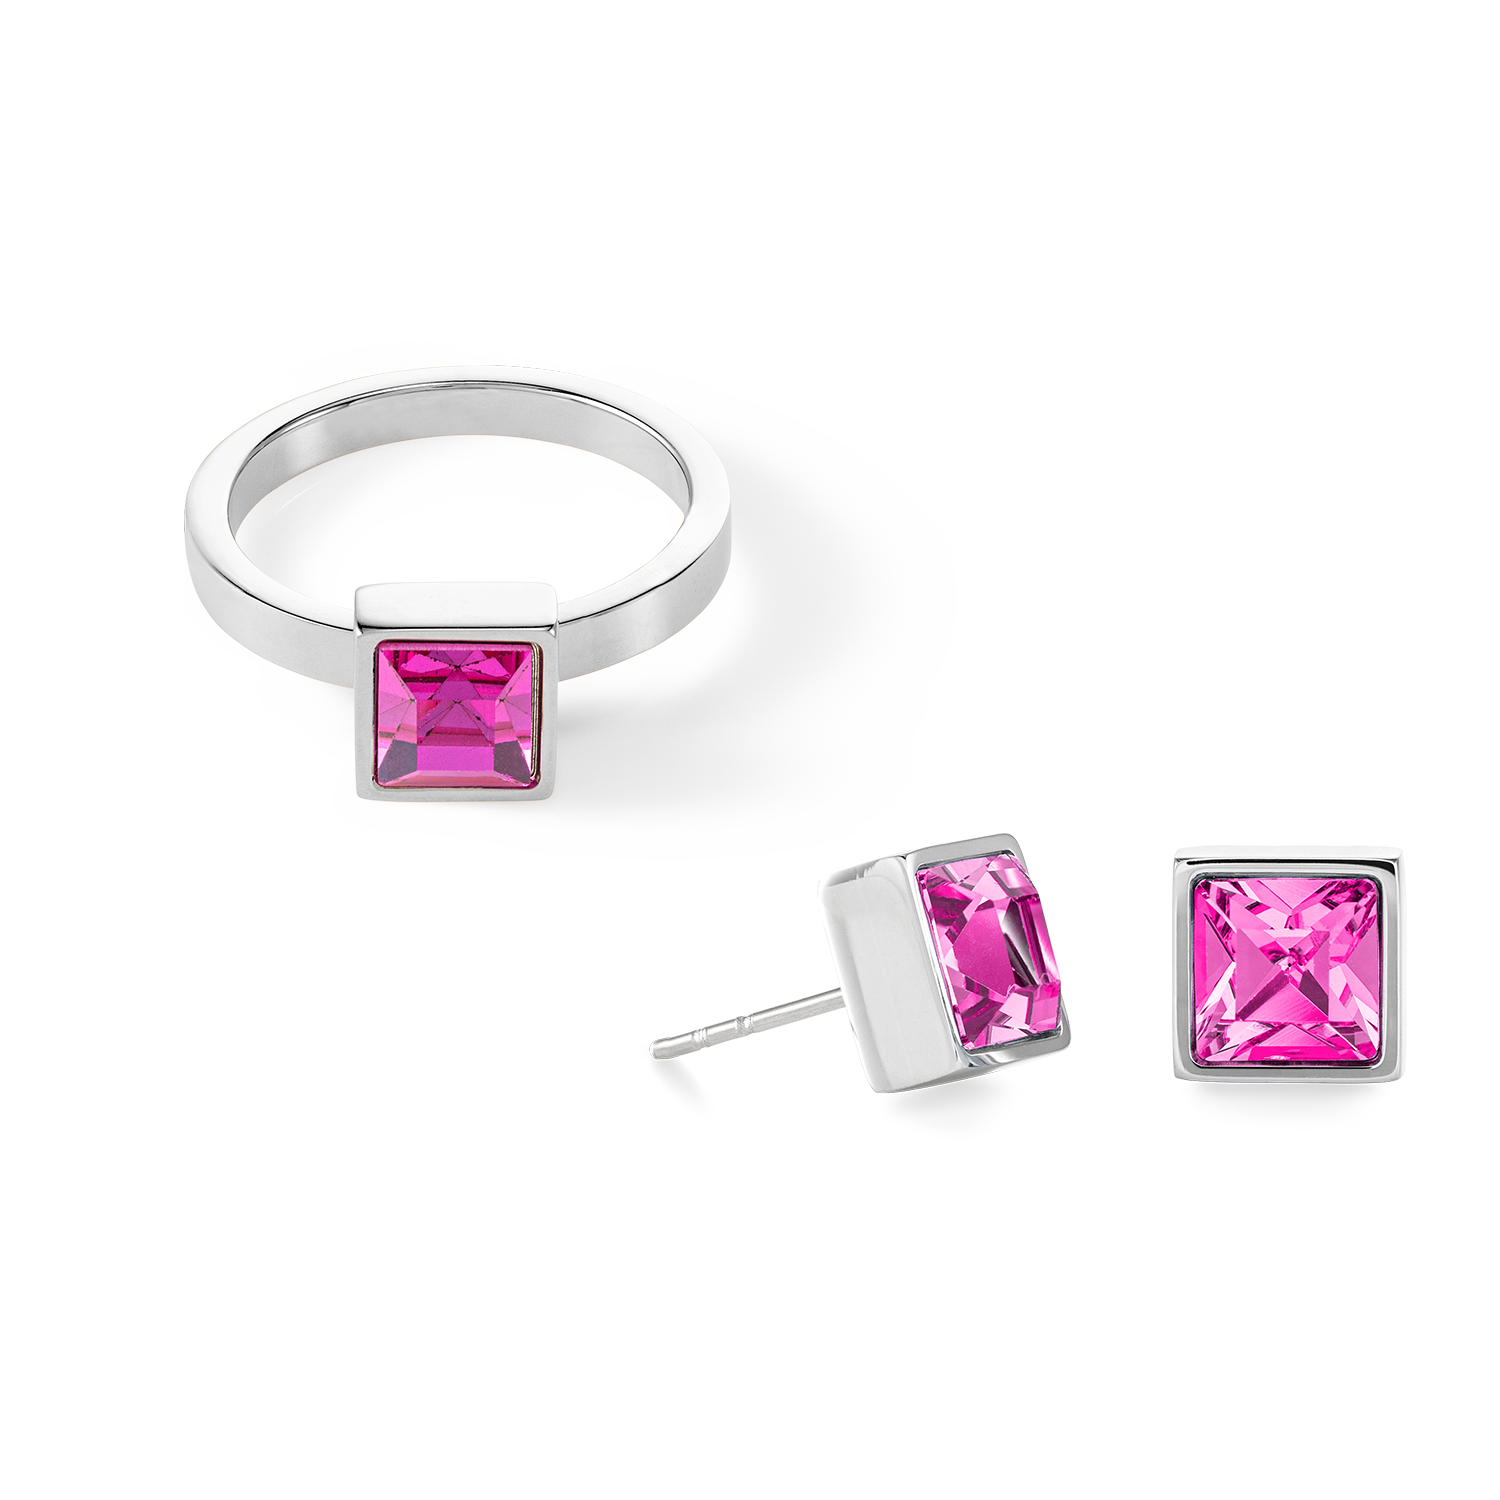 Brilliant Square big earrings silver light pink